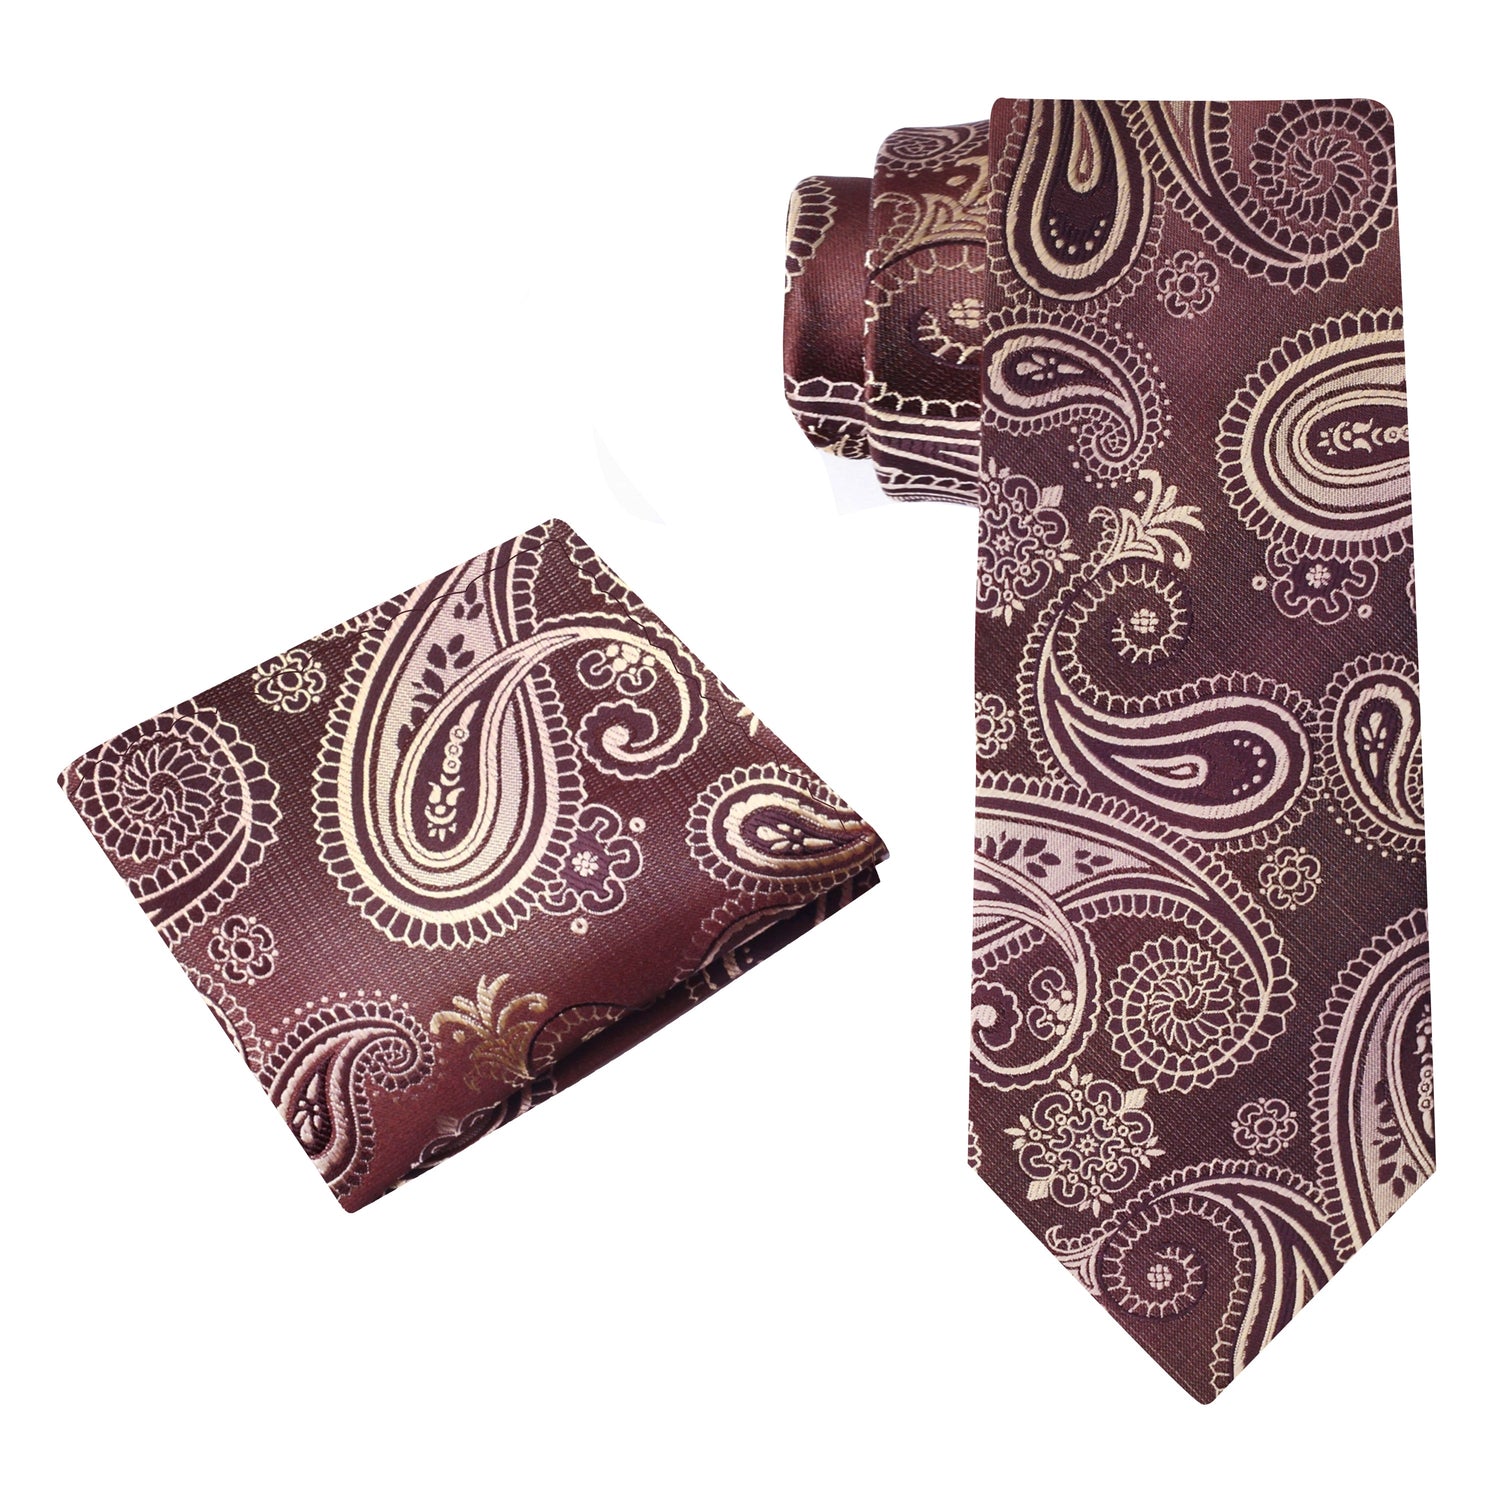 Alt View: brown gold paisley tie and pocket square